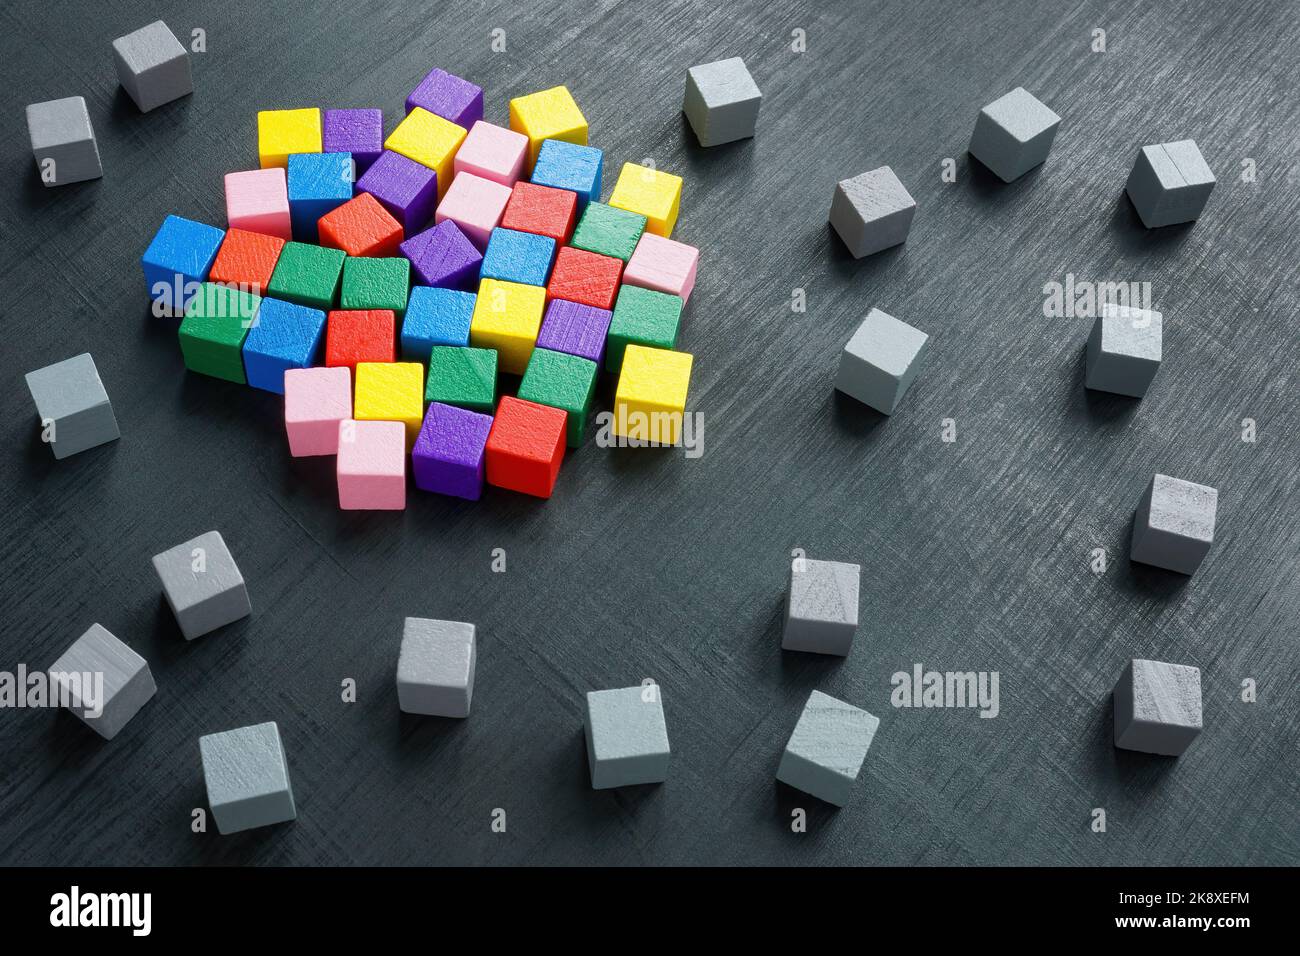 Integration, diversity and inclusion concept. Multi-colored cubes surrounded by gray ones. Stock Photo